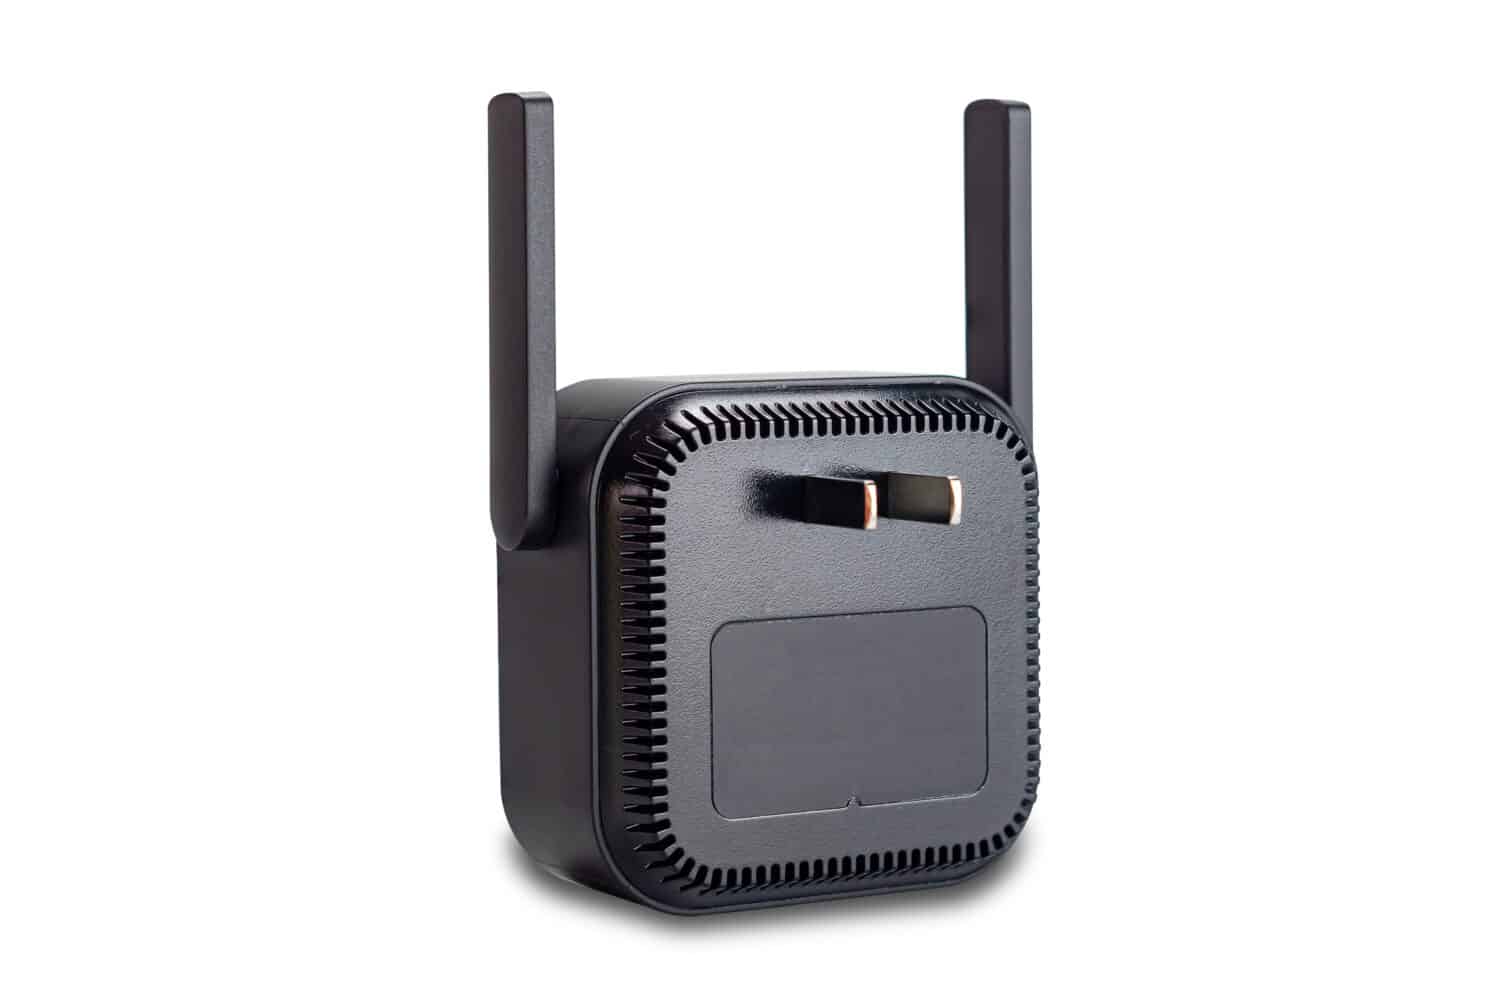 Back view of wireless wi-fi signal range extender or wireless internet repeater or wi-fi signal booster amplifier with adjustable antennas and pins for plugged in electric socket isolated on white.